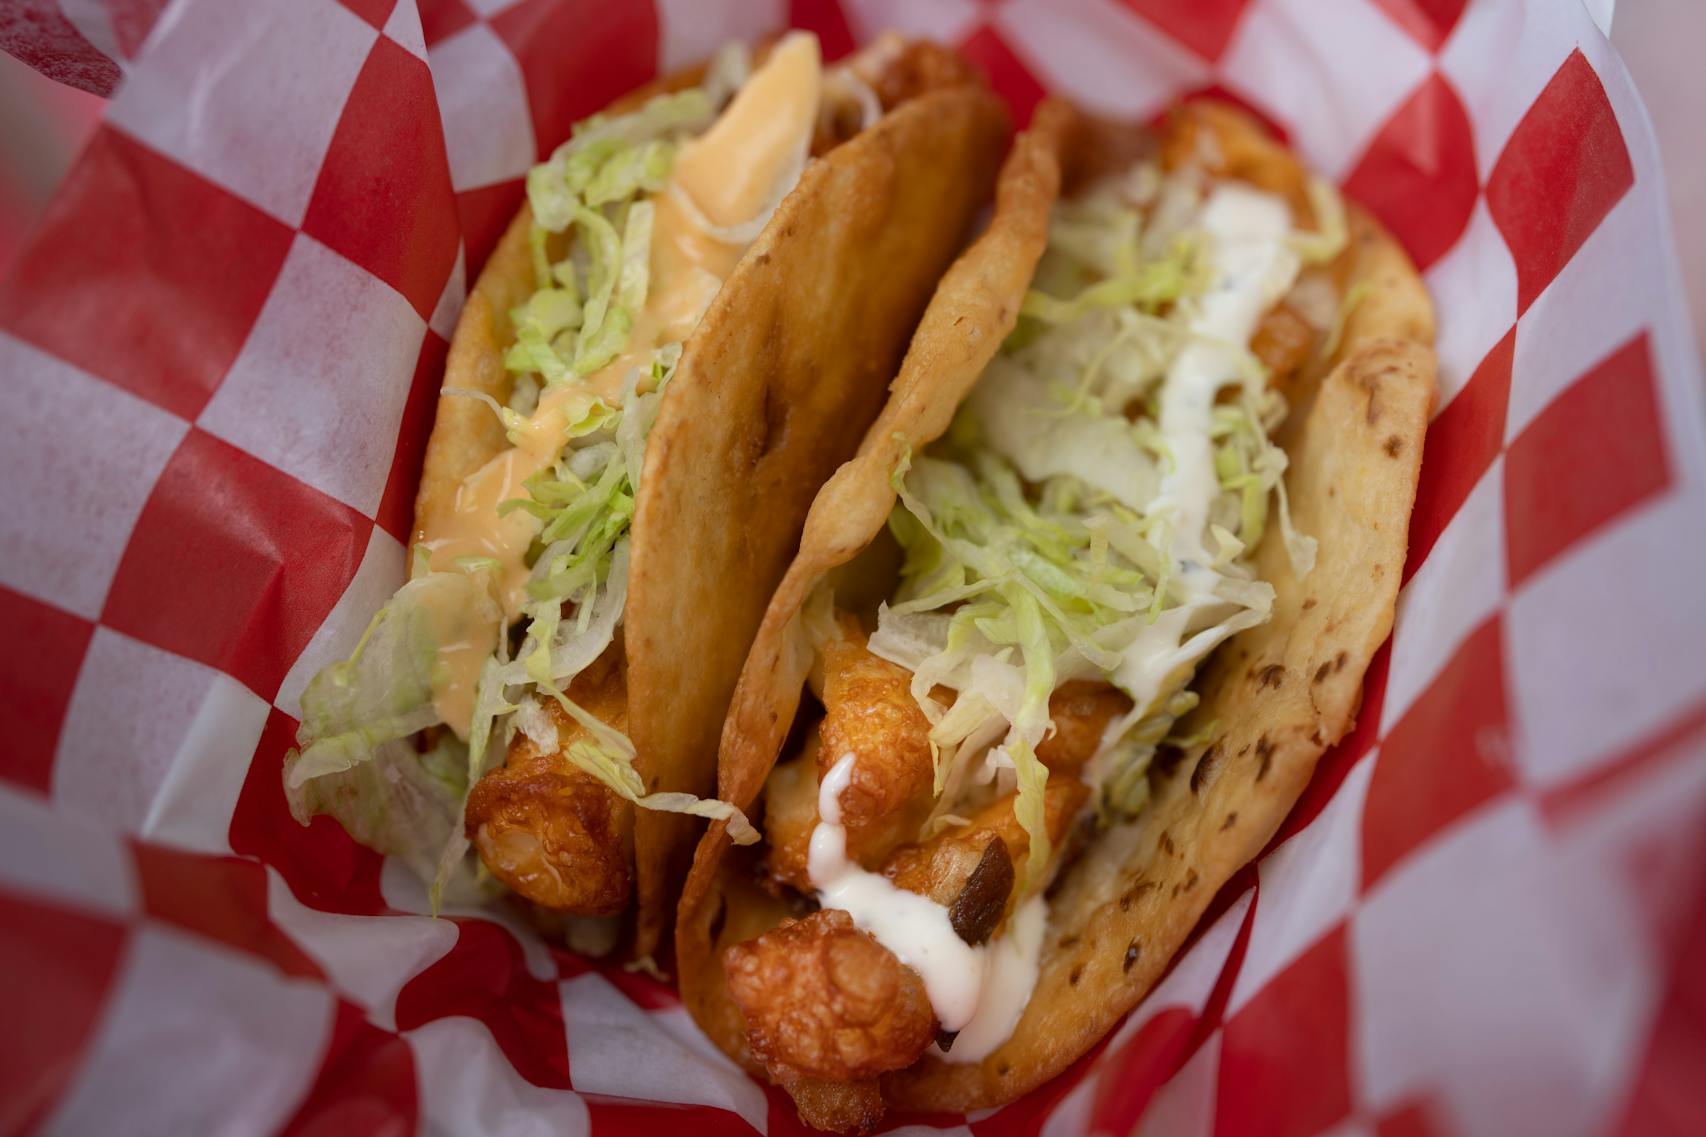 The Original Cheese Curd Taco and Box Checker Cheese Curd Taco from Richie’s Cheese Curd Tacos. New foods at the Minnesota State Fair photographed on Thursday, Aug. 25, 2022 in Falcon Heights, Minn. ] RENEE JONES SCHNEIDER • renee.jones@startribune.com